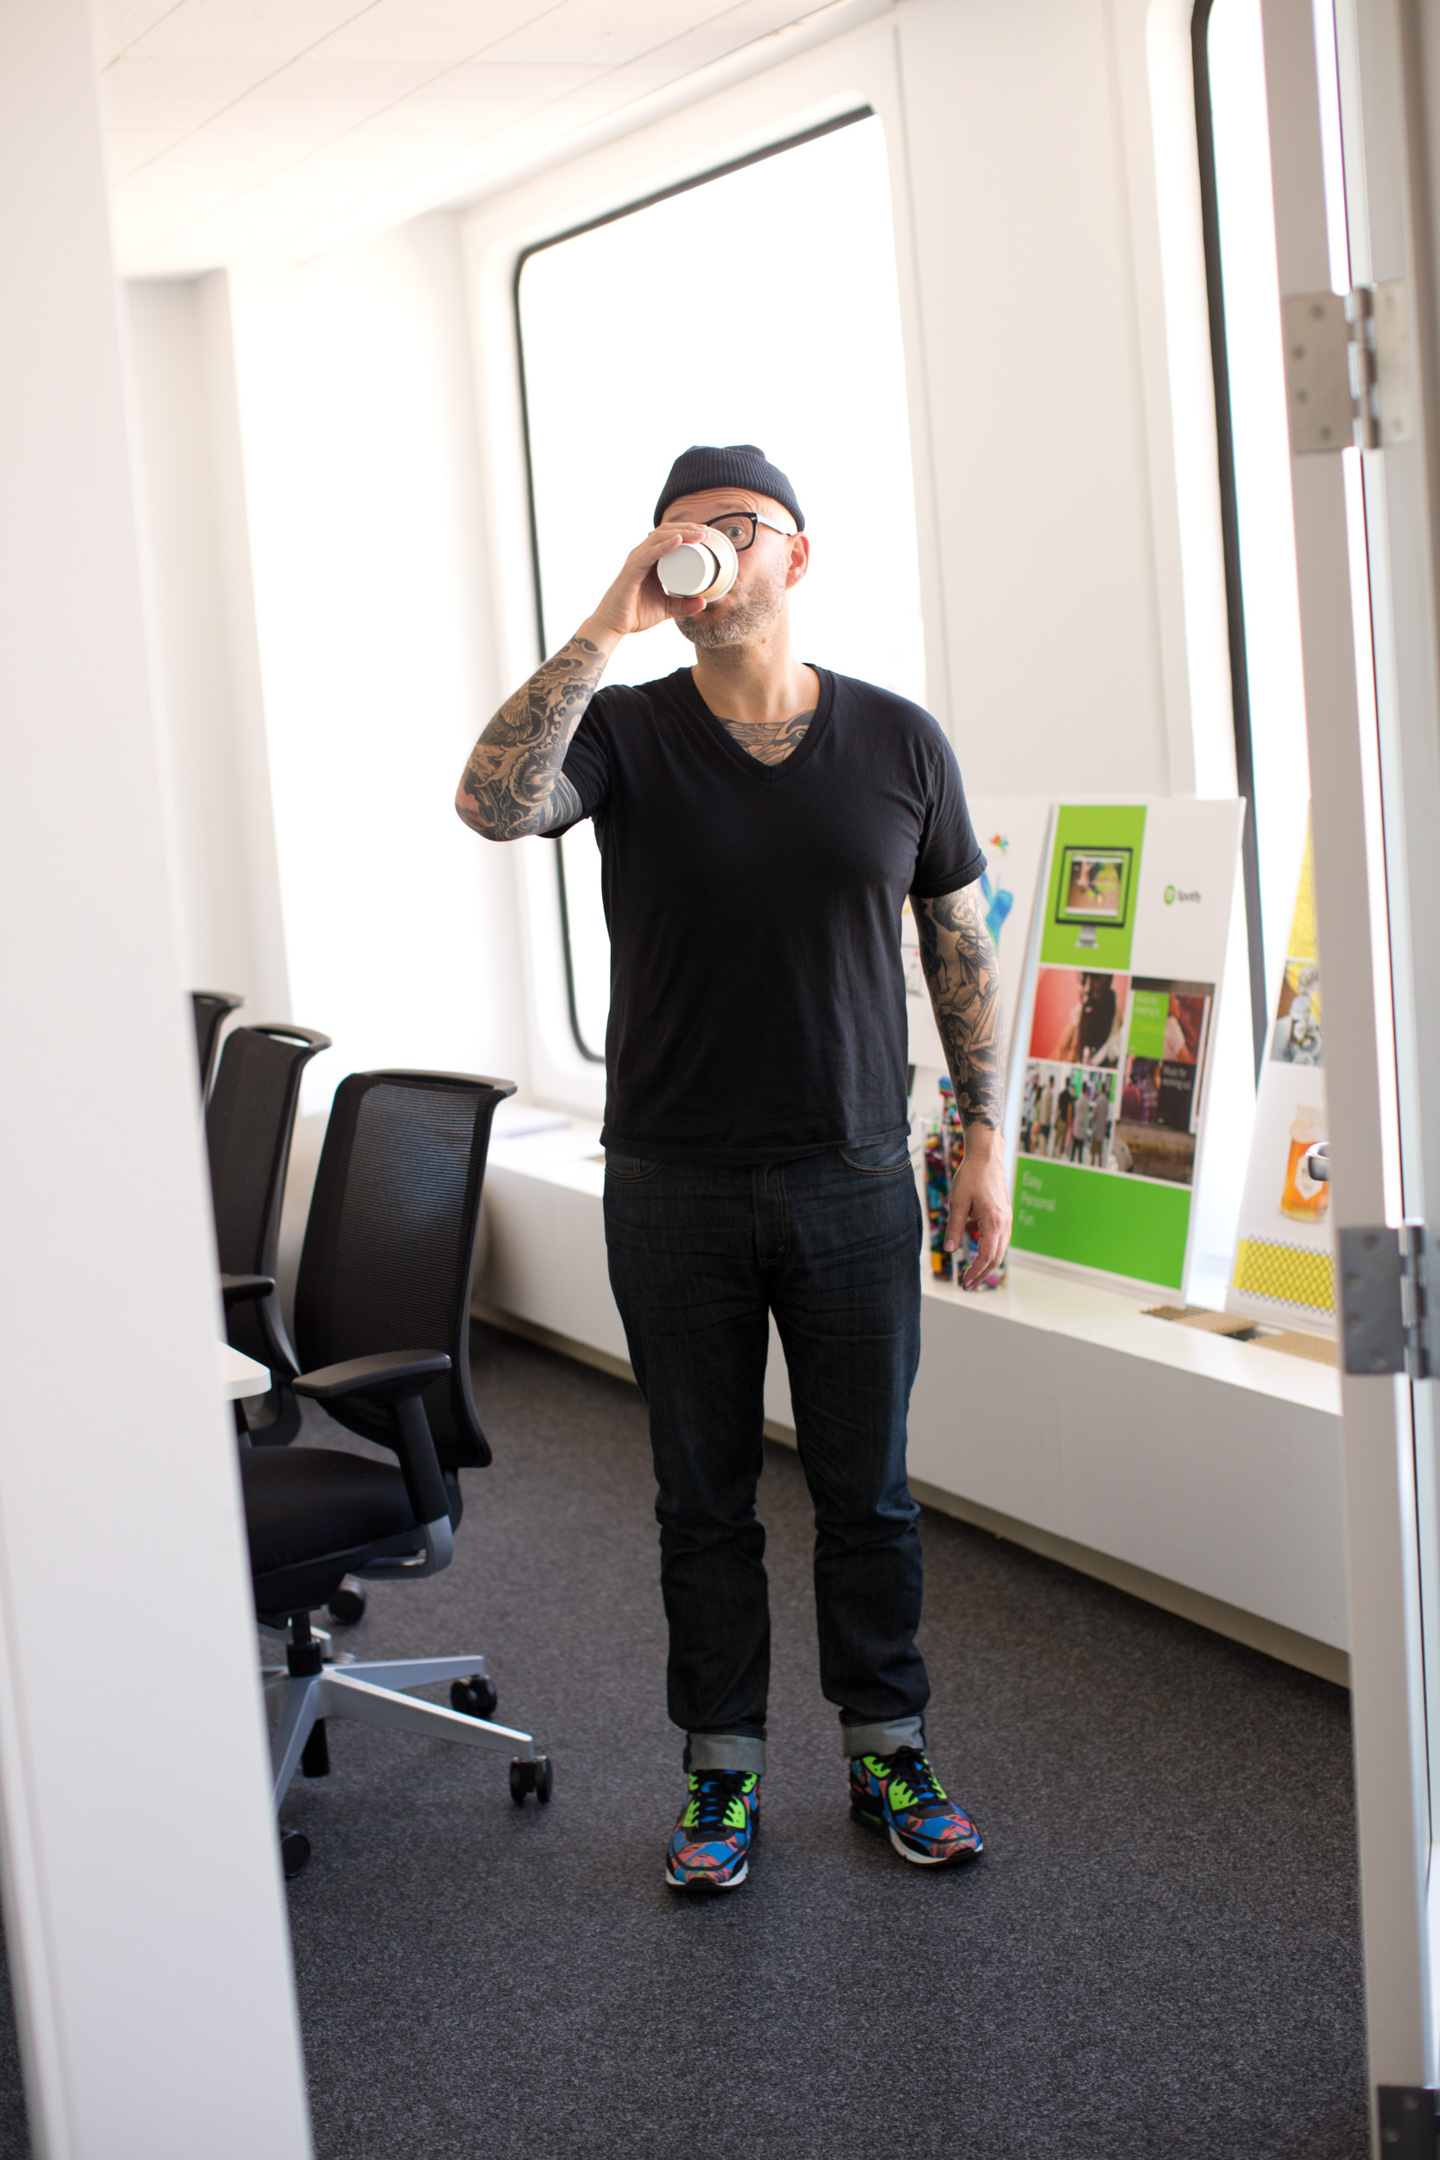 A man with tattoos and trainers drinks coffee in a San Francisco office